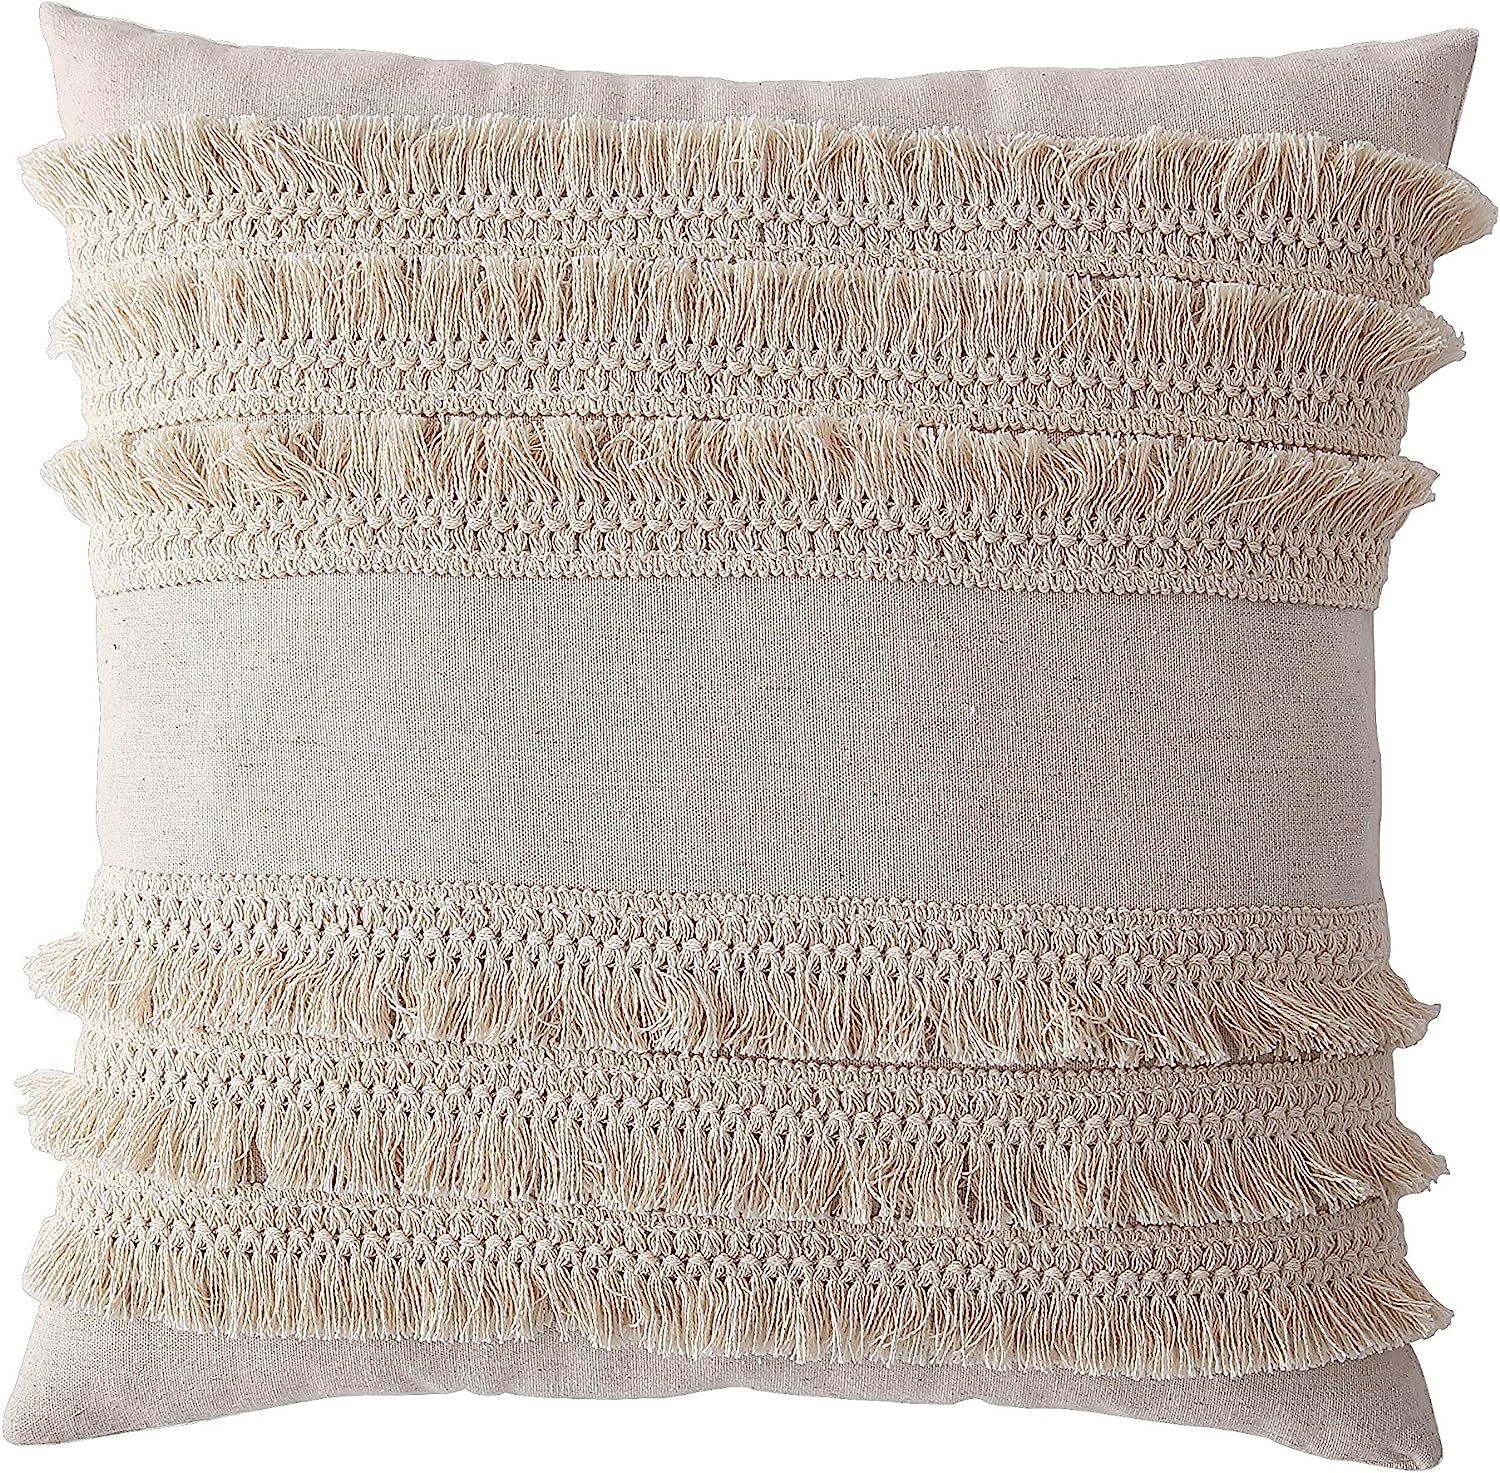 Morgan Home Decorative Fringe Throw Pillow Cushions Cover for Sofa Couch or Bed - 18 x 18 inches,... | Amazon (US)